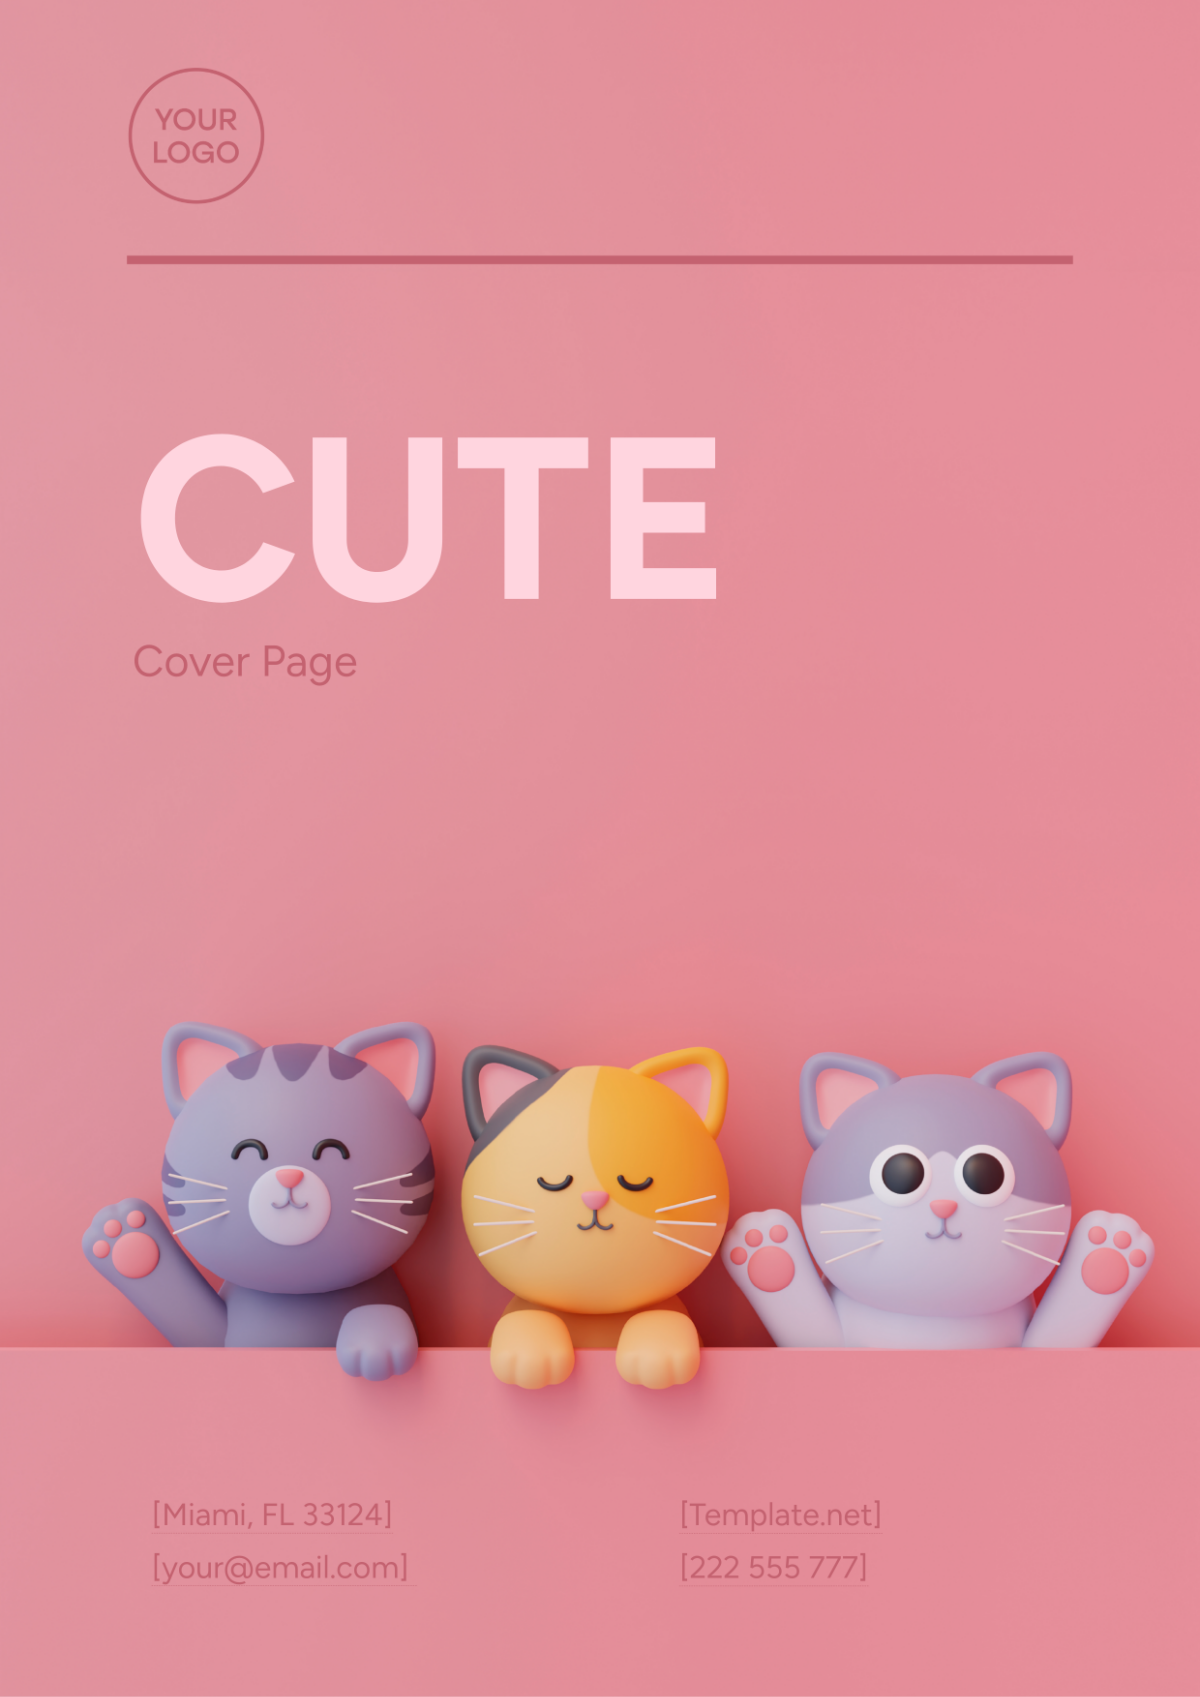 Cute Cover Page Image Template